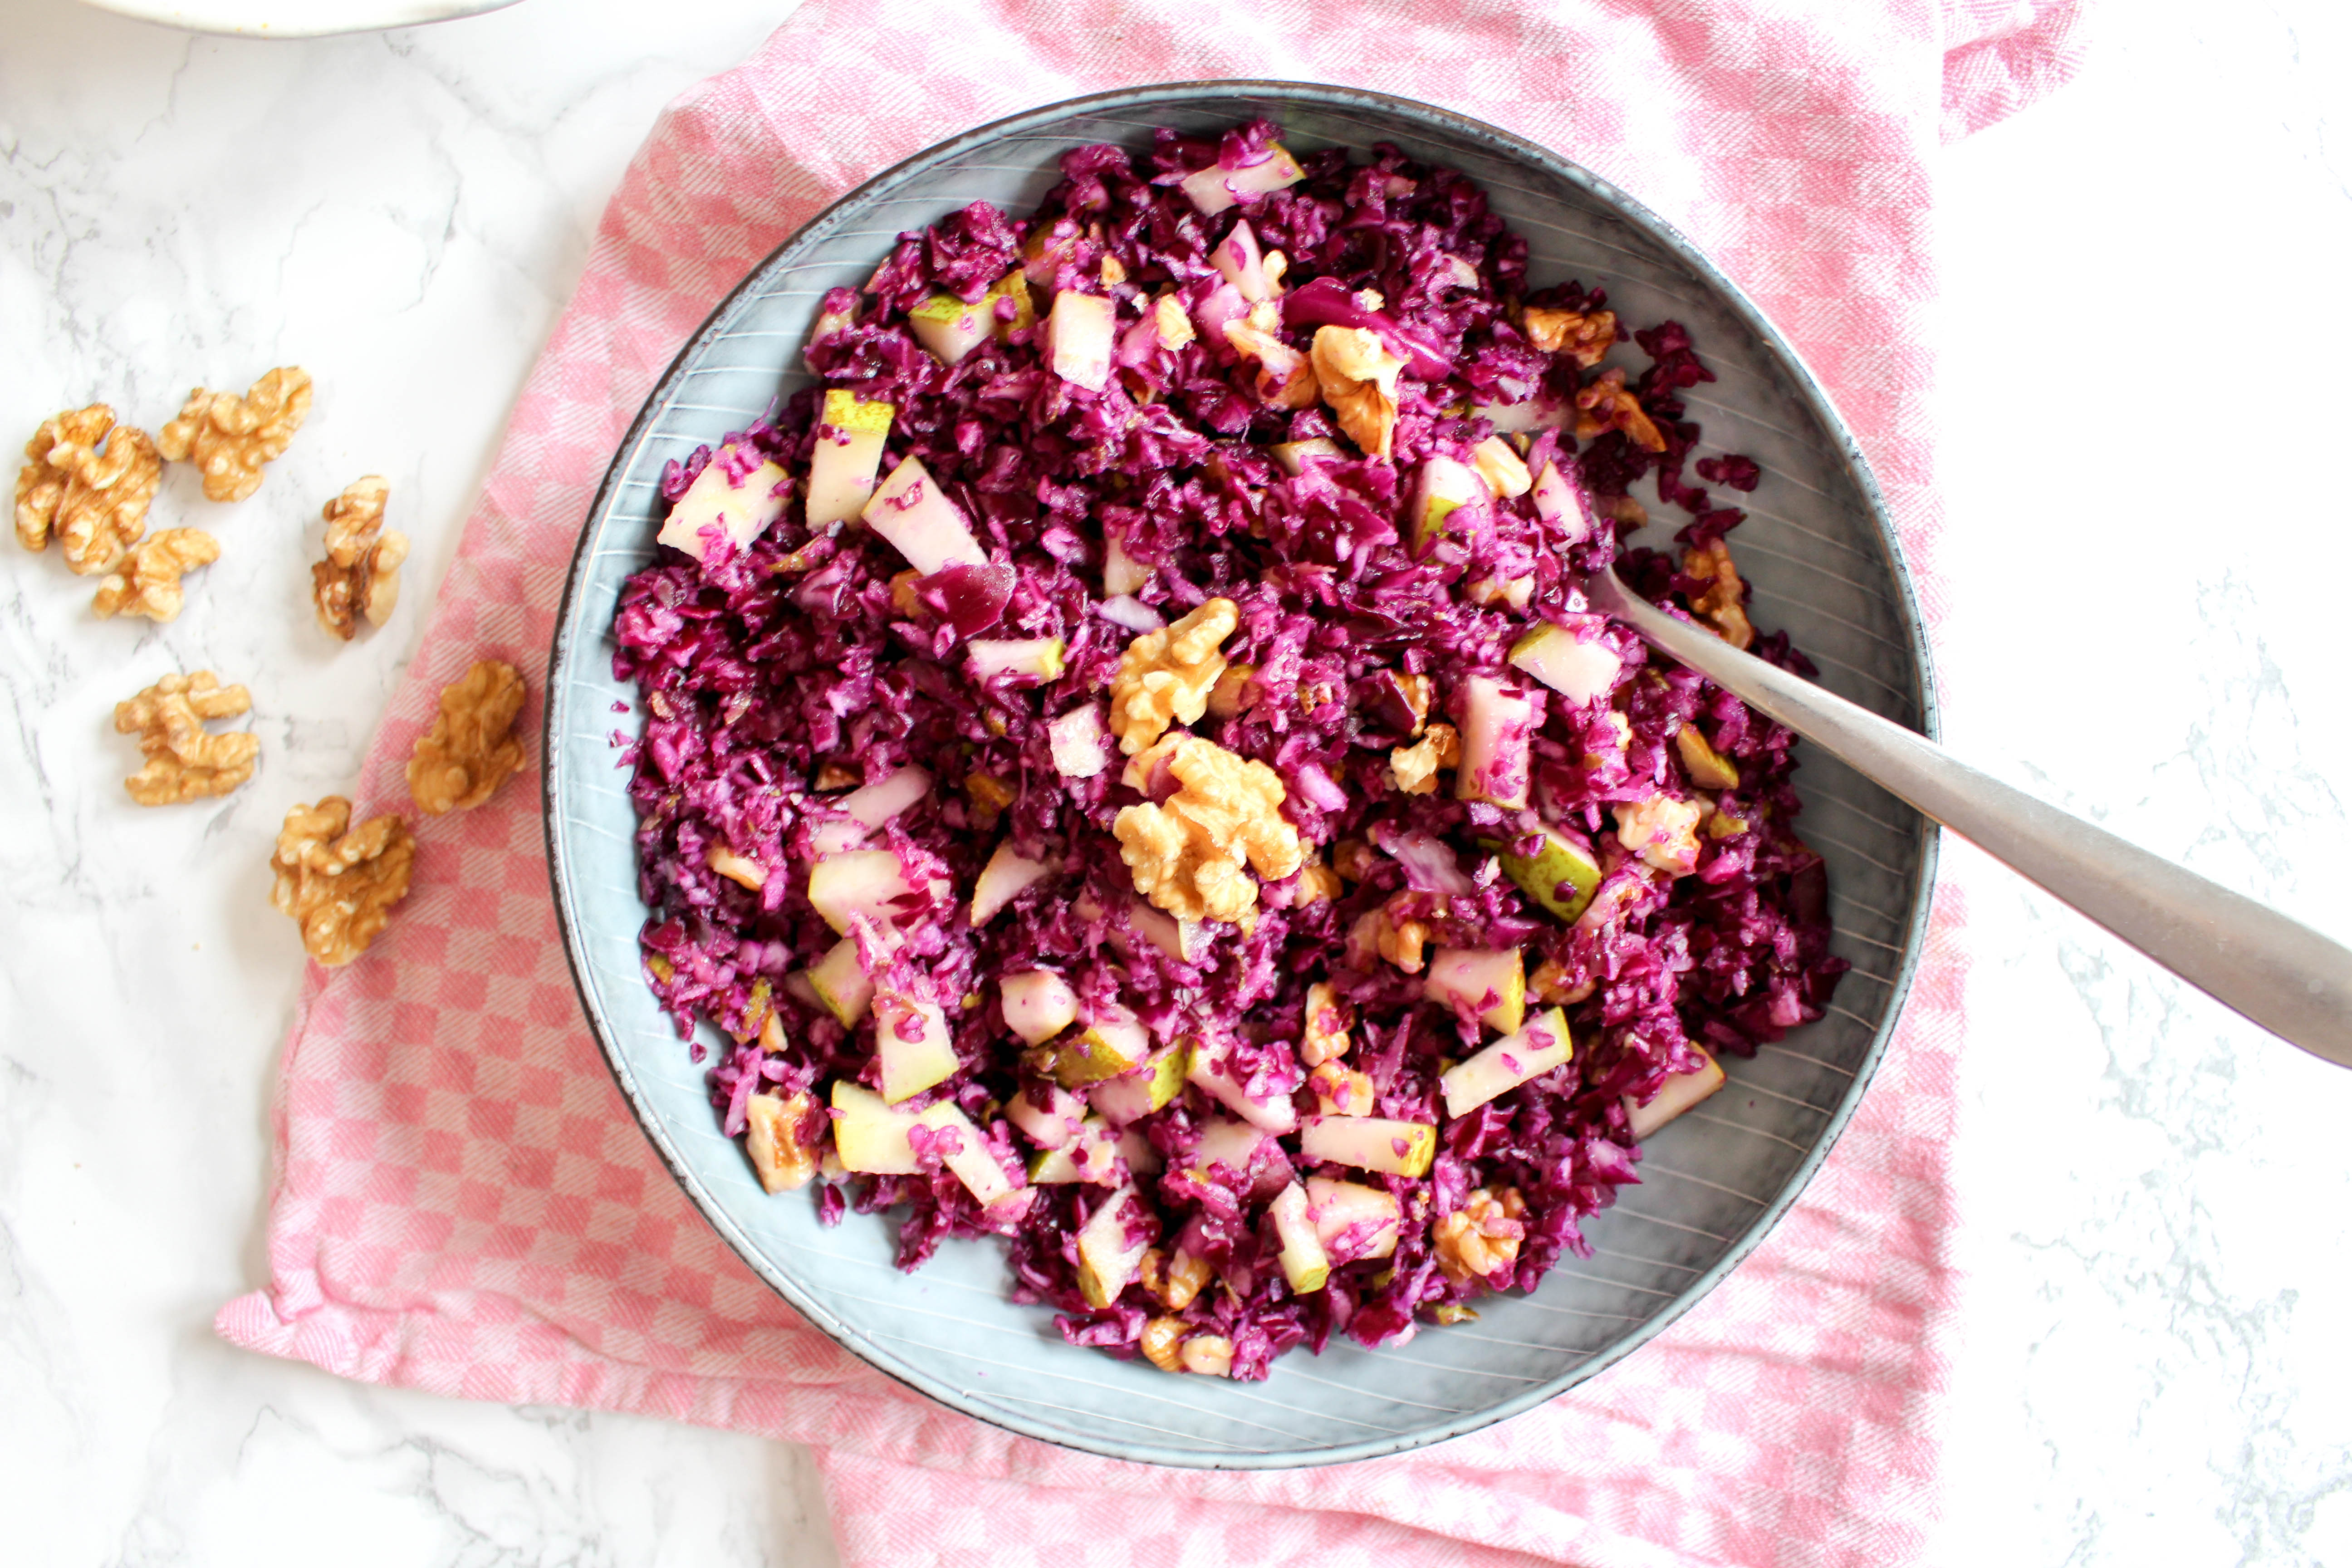 Red Cabbage and Pear Salad with Walnuts